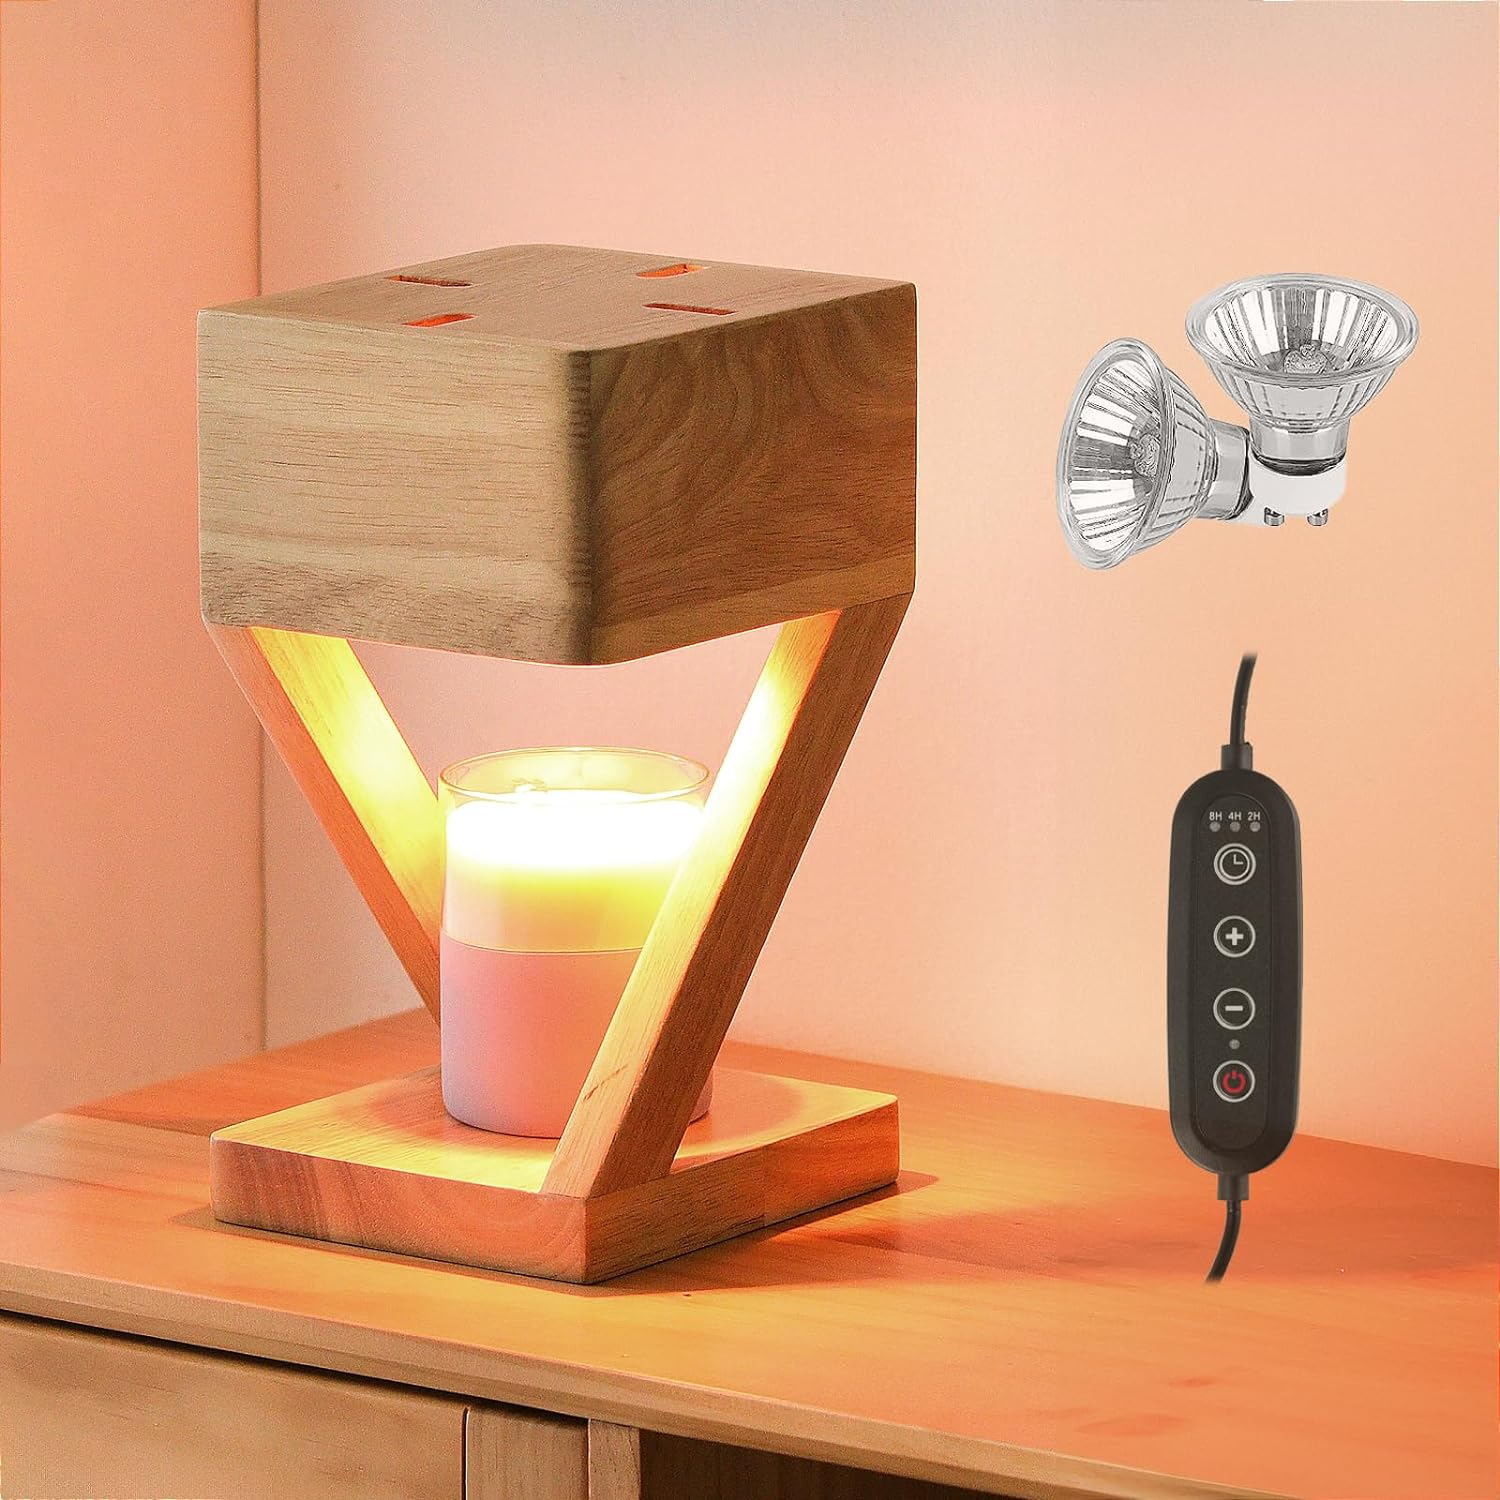 Contemporary Wood Bedroom Square Mini Warming Candle Lamp